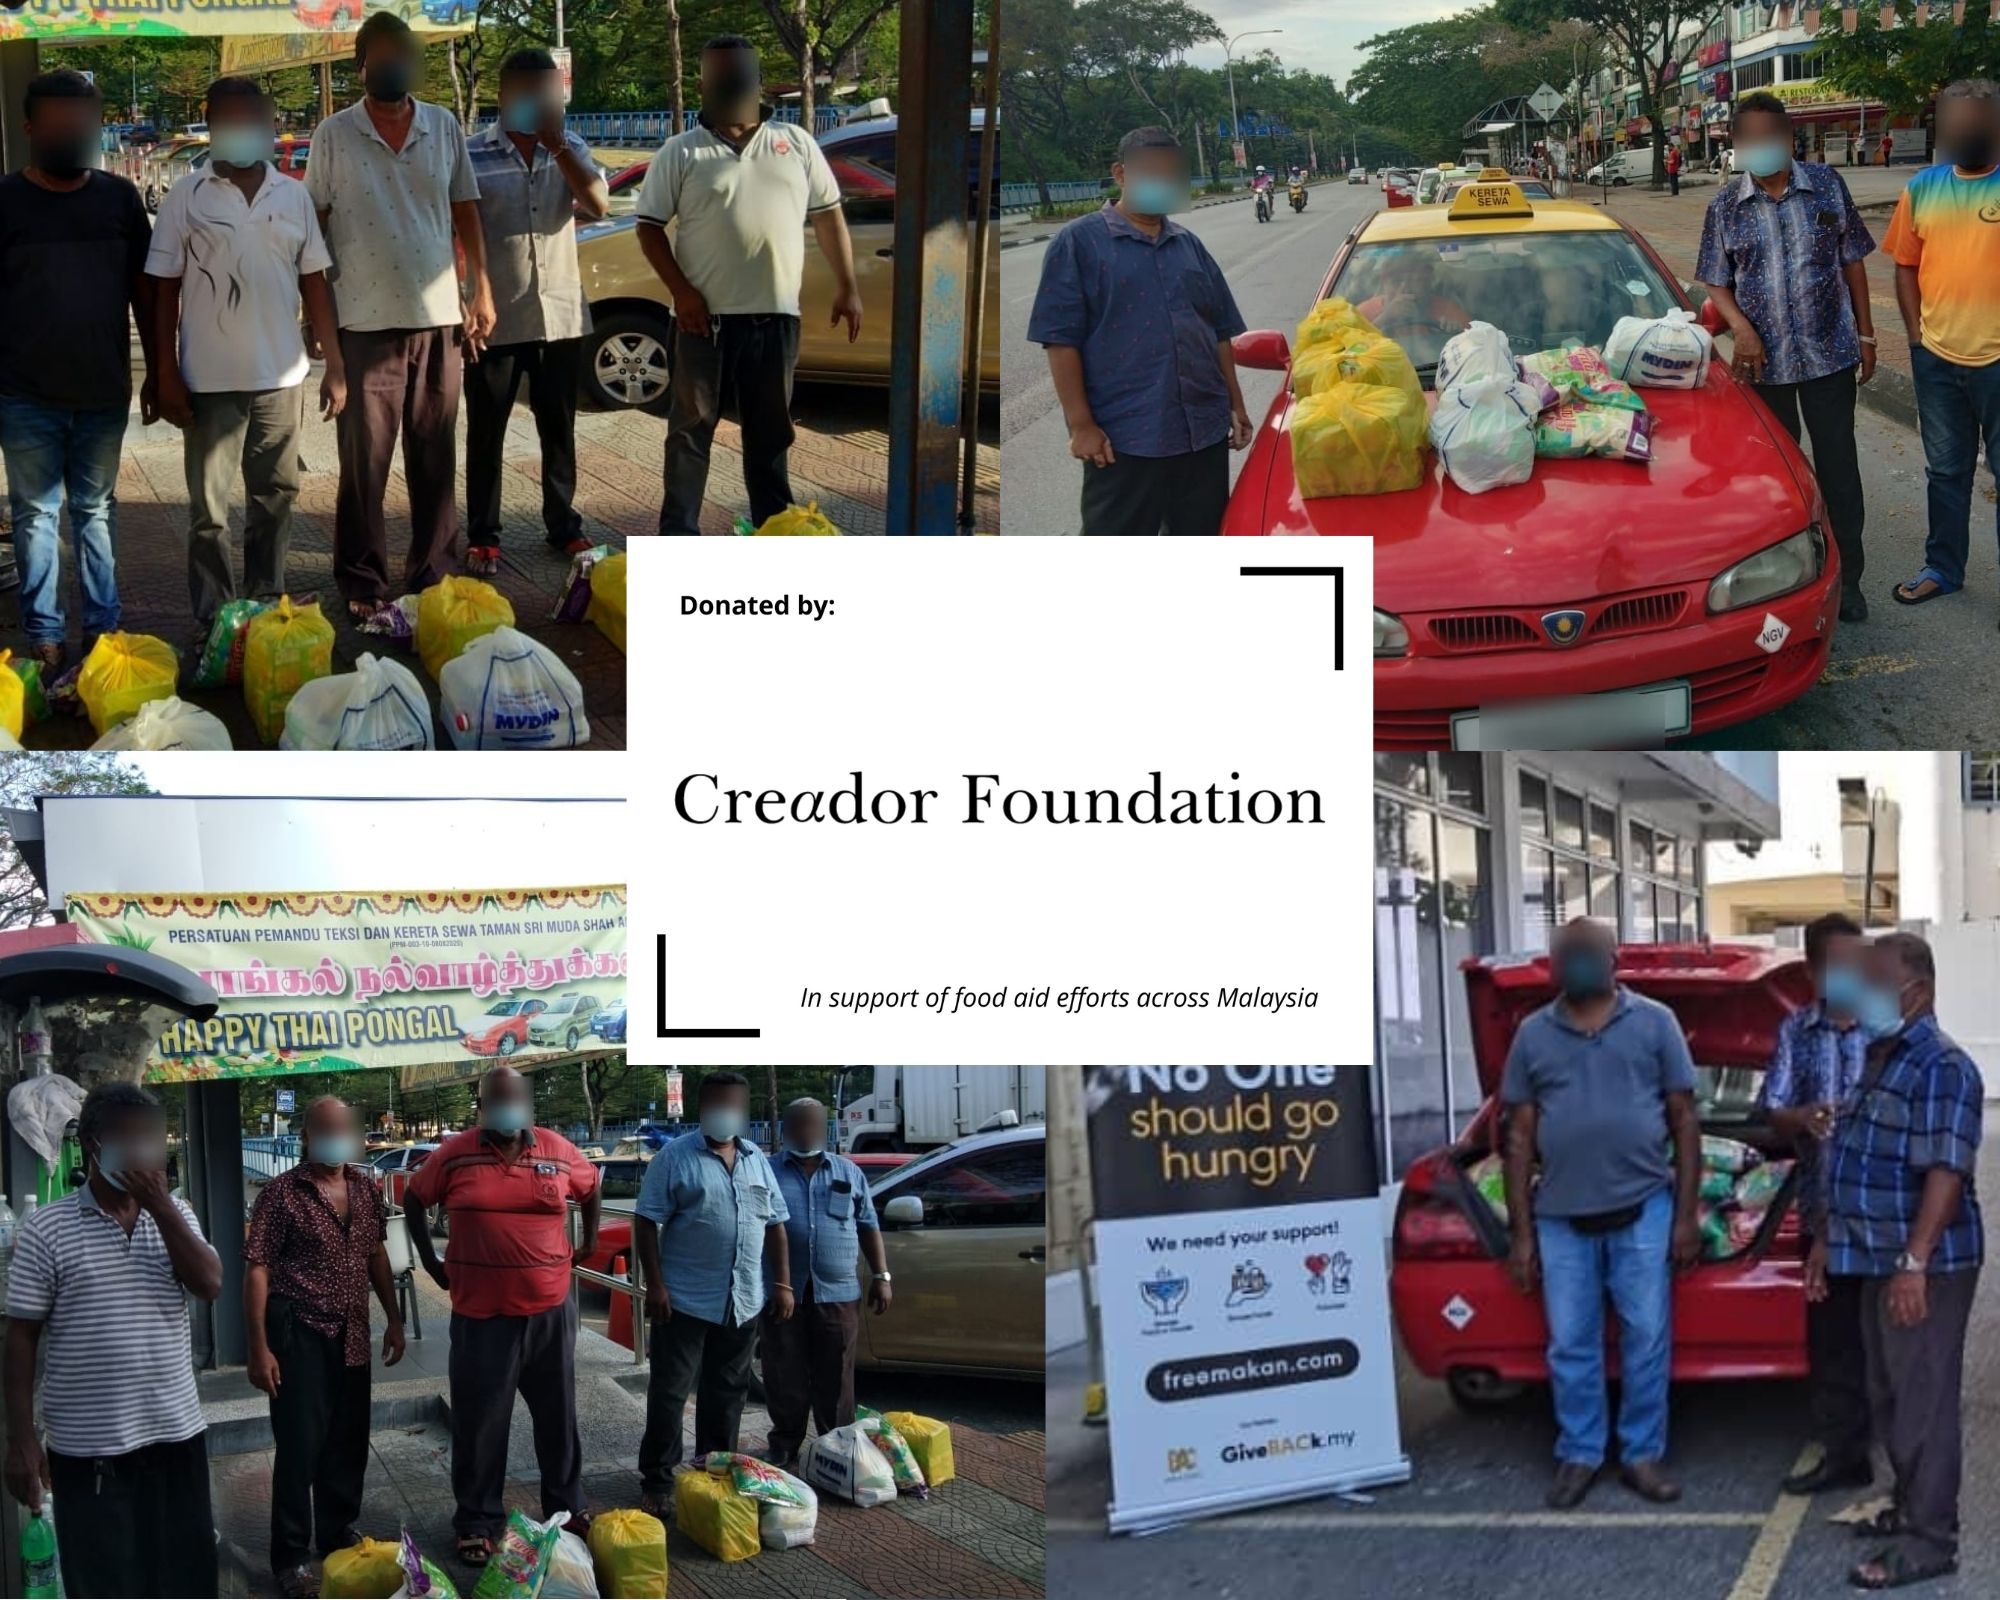 Creador Foundation’s Generous Donation Feeds Taxi Drivers In Shah Alam